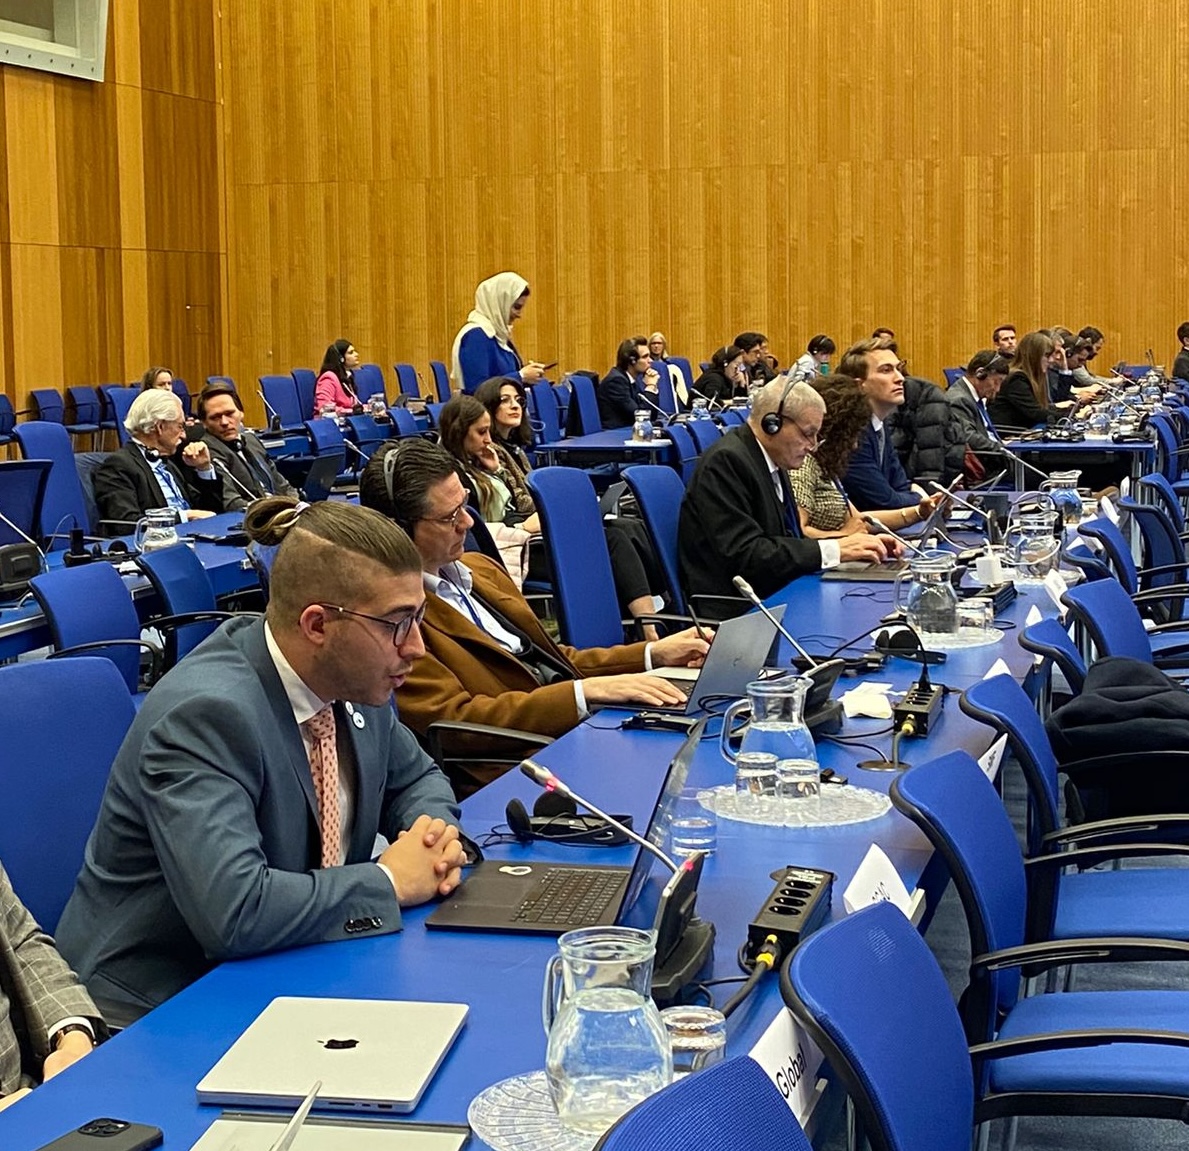 Very honoured to address the Legal Subcommittee of the UNCOPUOS🇺🇳 on behalf of @SGAC, presenting our proposals for #Space #Sustainability and #SpaceTrafficManagement 🛰️